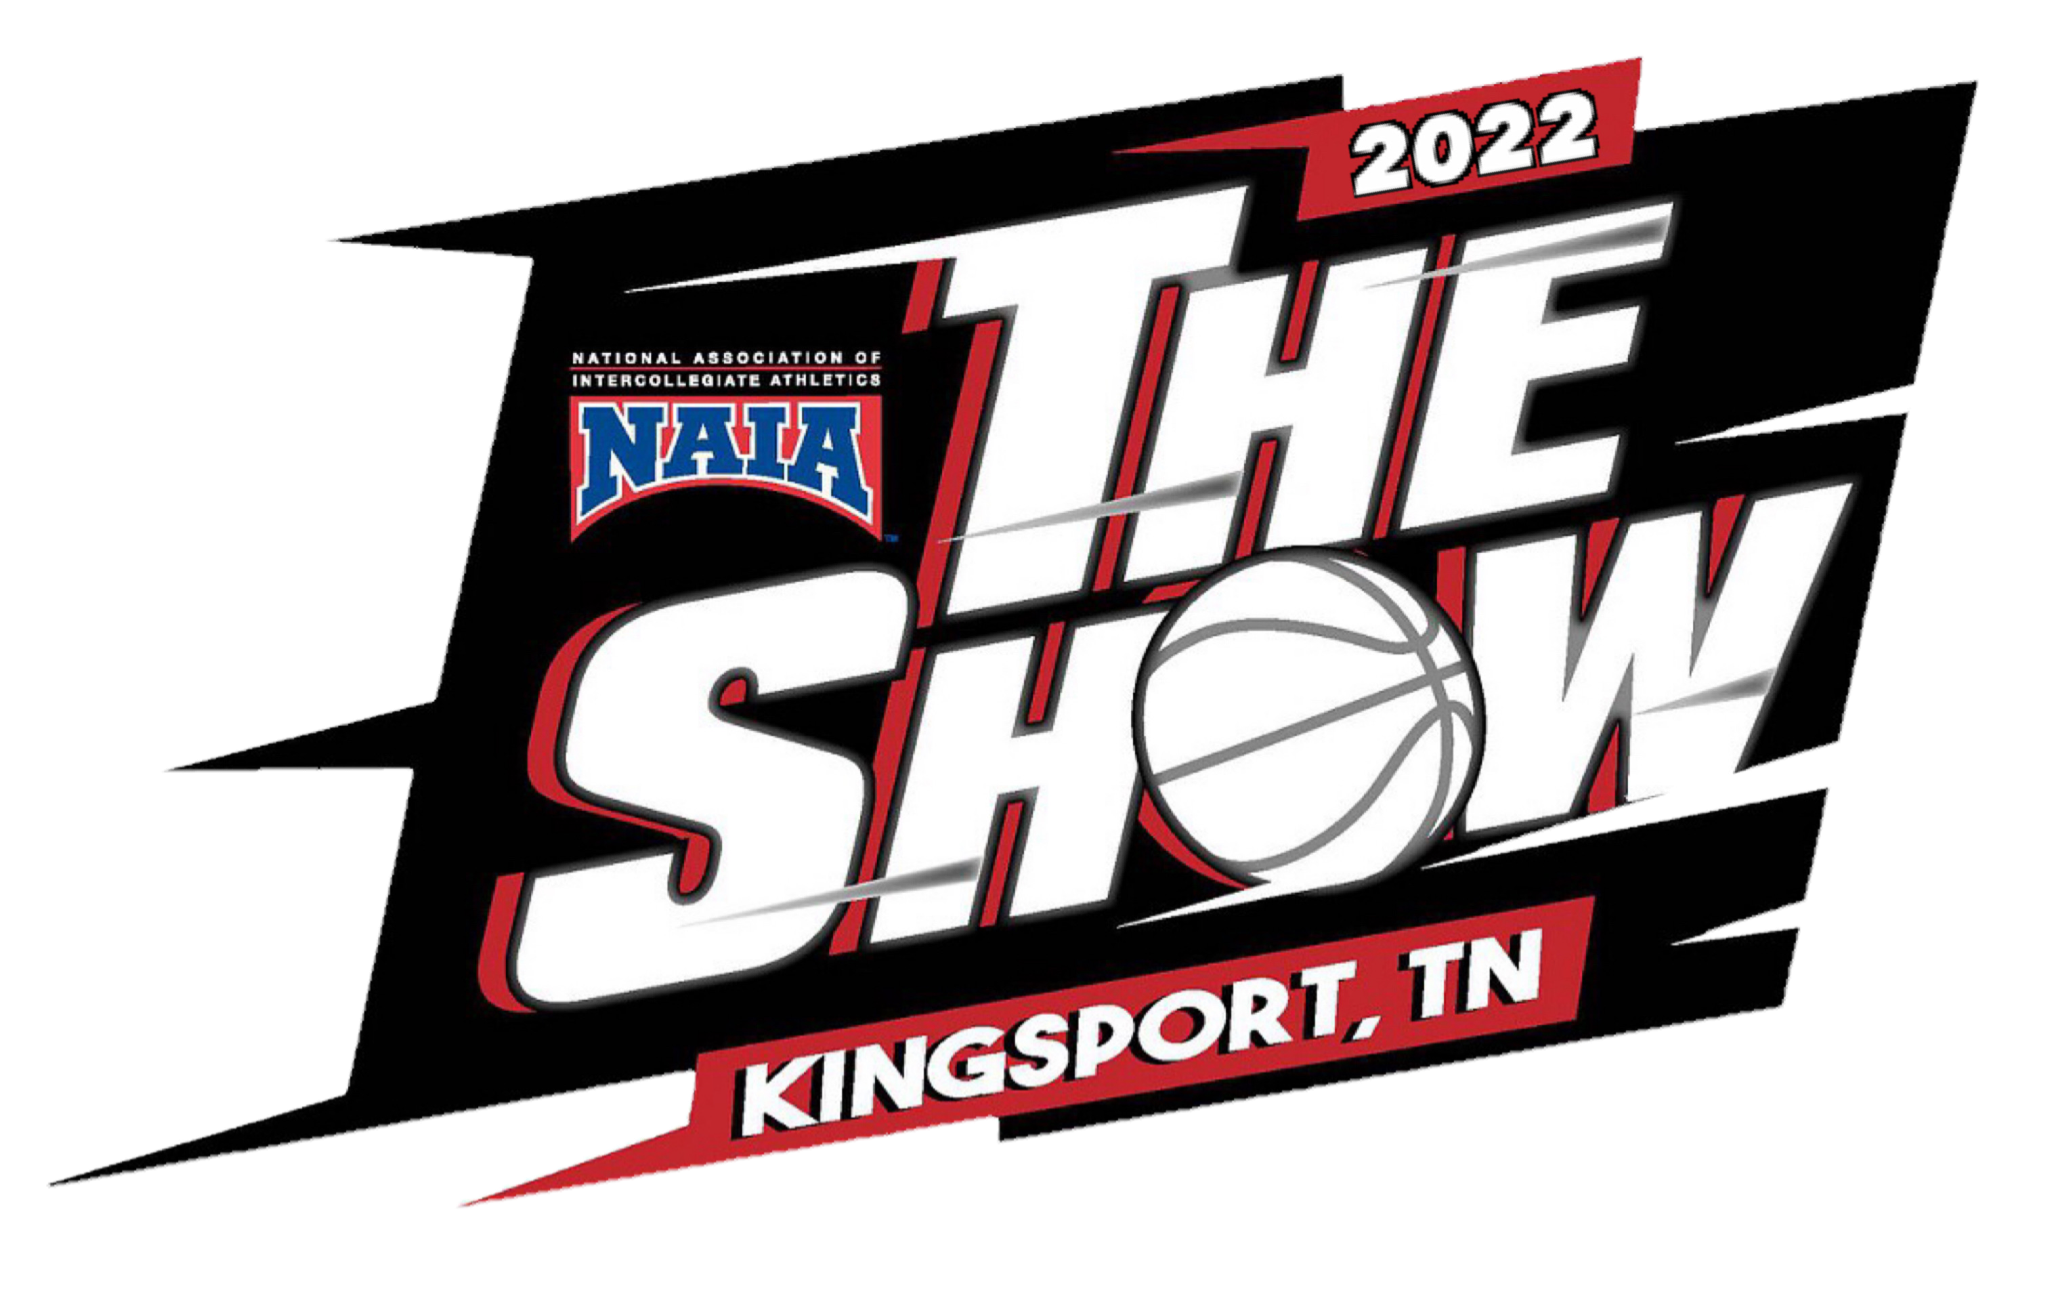 NAIA ‘The Show’ Official Schedule Release